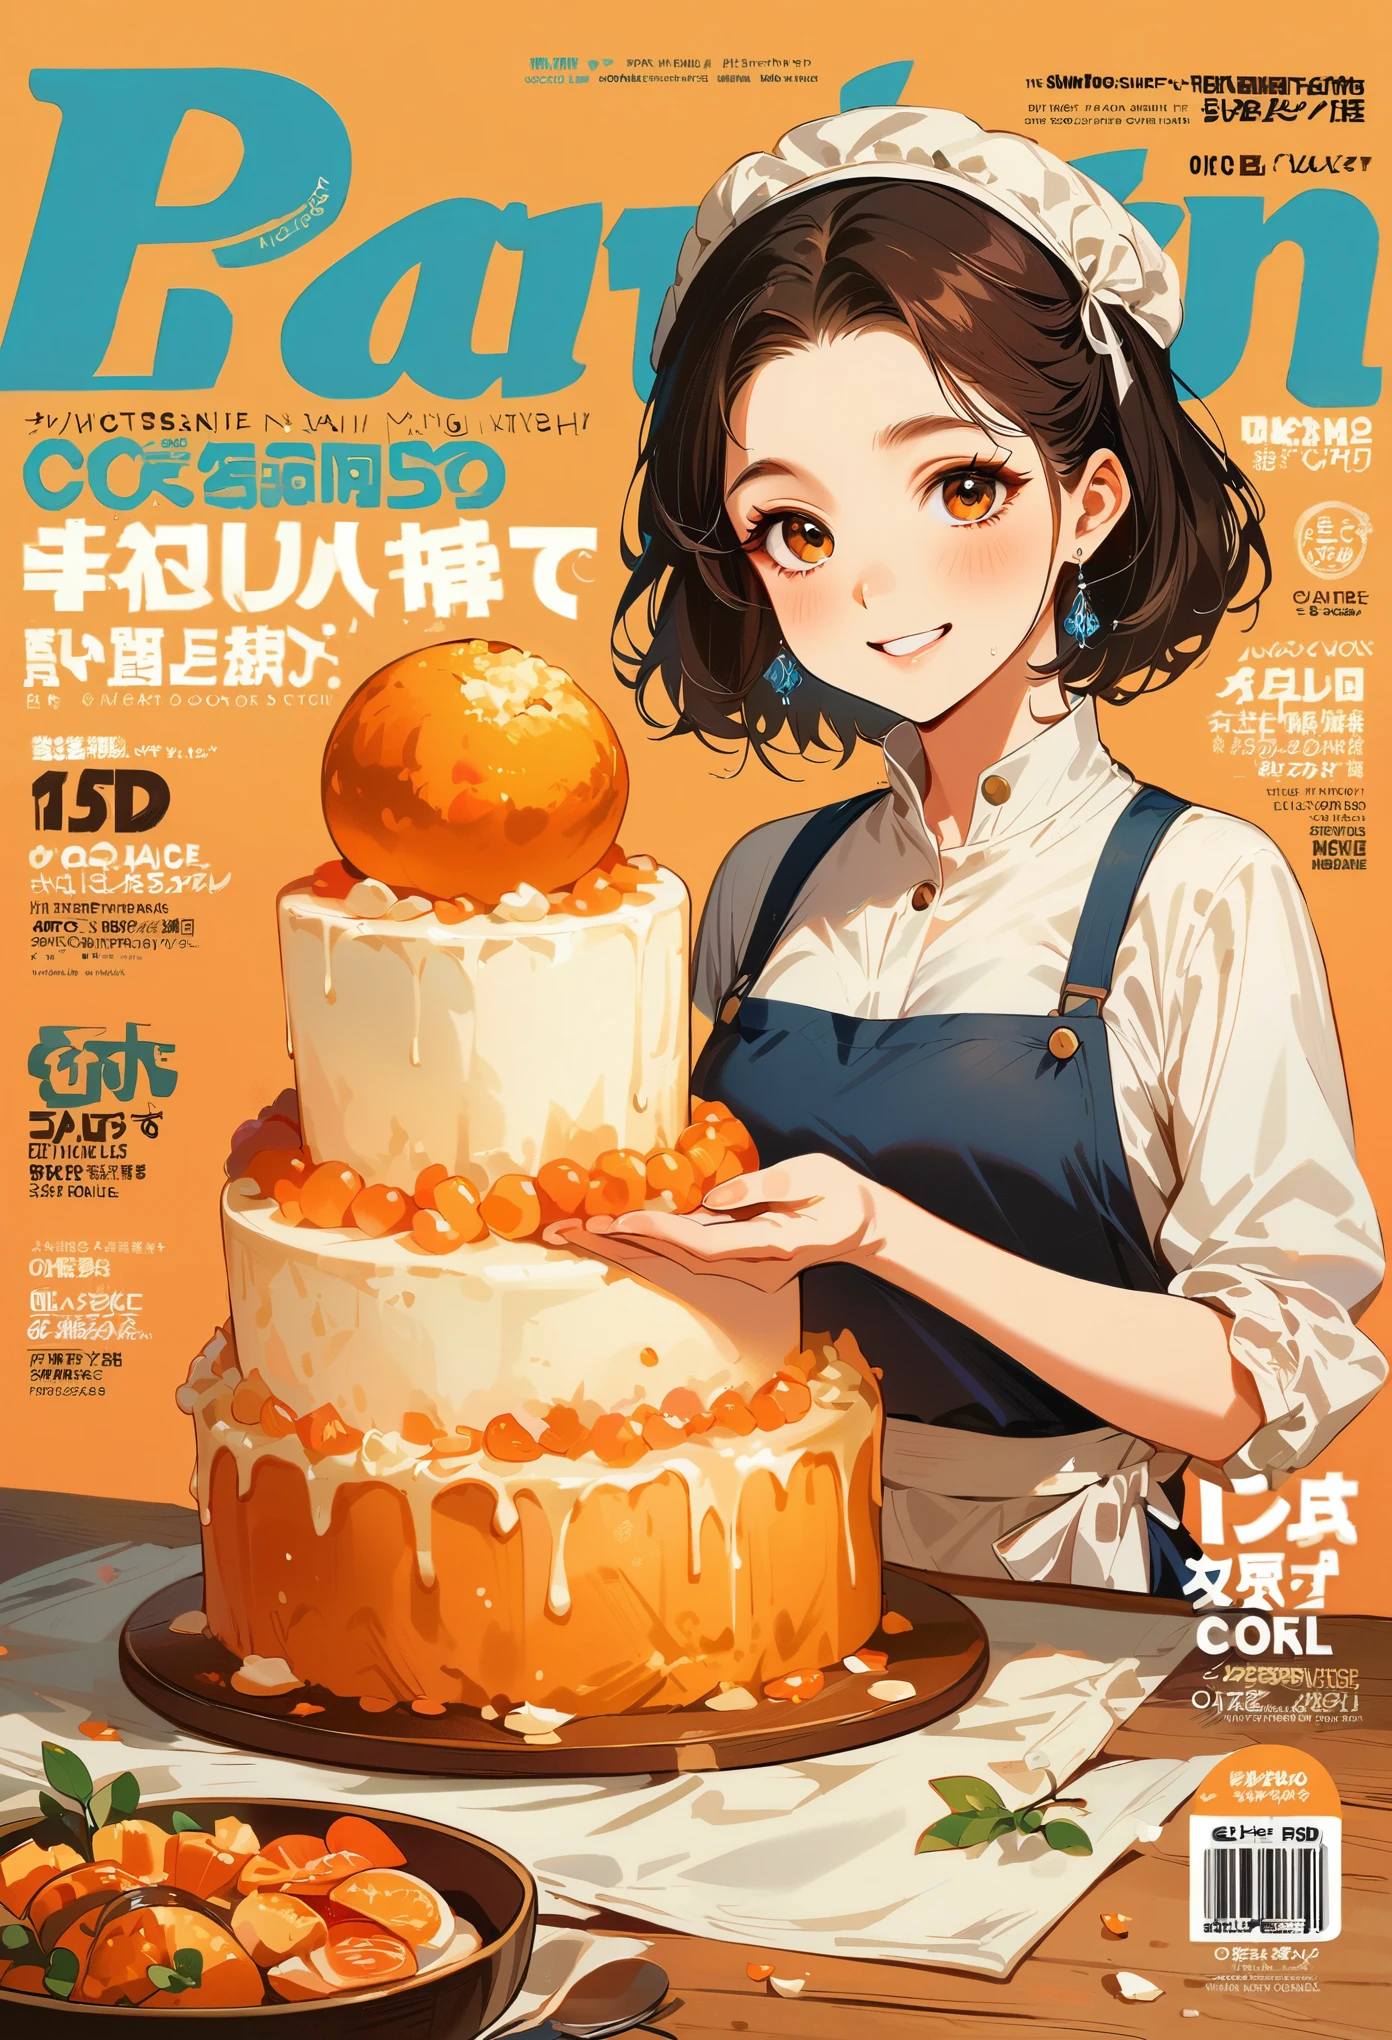 (best quality,masterpiece:1.2),woman cooking magazine cover,1 girl,20 years old,stunning,adorable,warm smile,sandglass figure,floral dress,apron,food,text,charts,magazine title